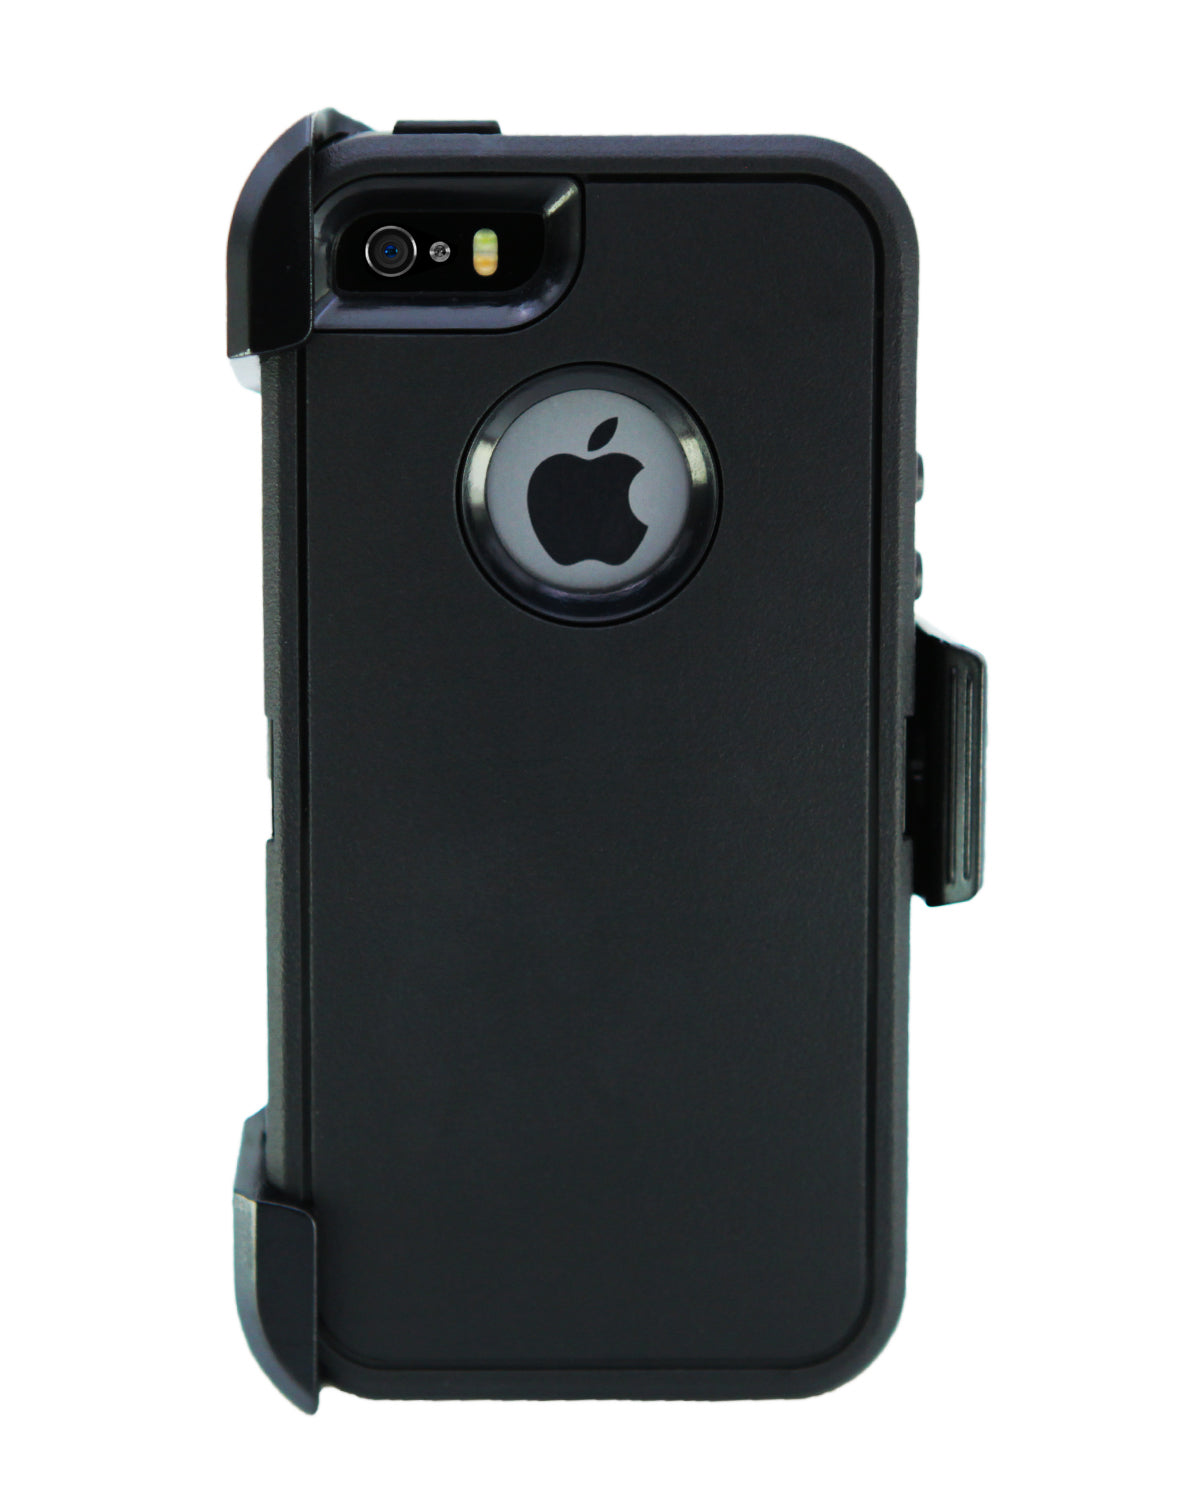 OtterBox Replacement Holster Clip for iPhone SE (2nd Gen) & 8/7 Defender Cases (Used), Black